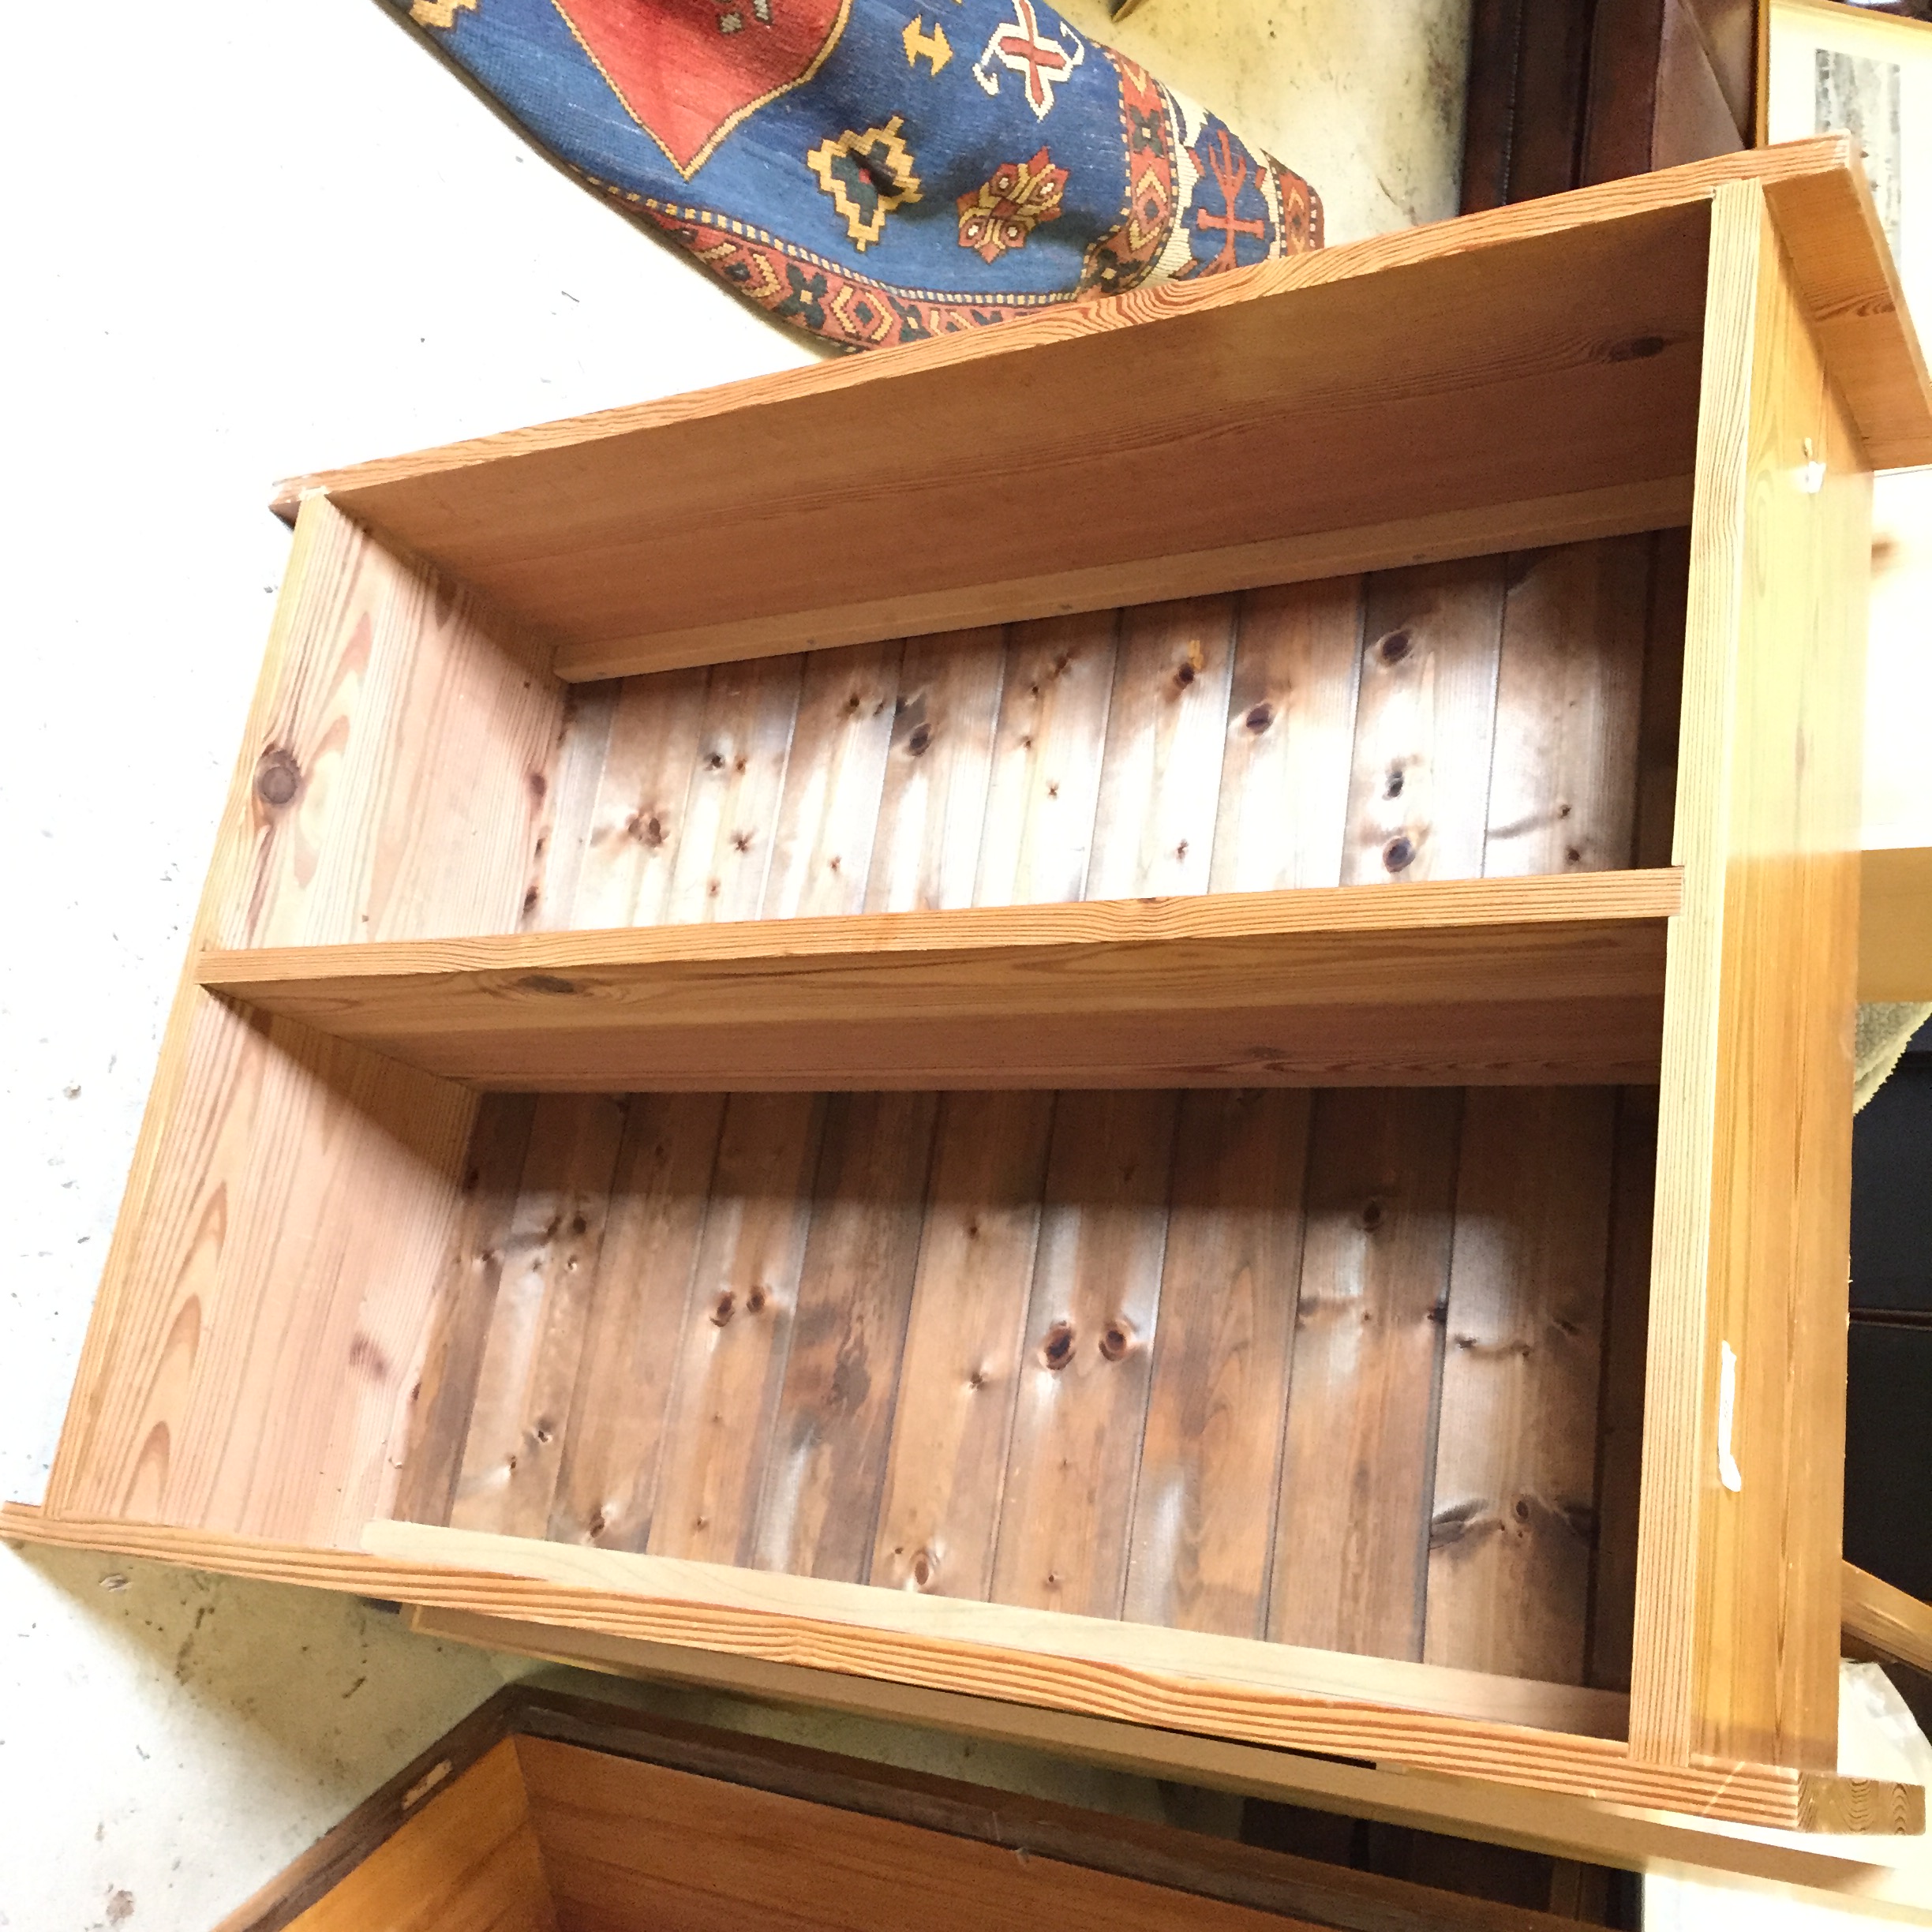 A pine wall mounted bookcase.